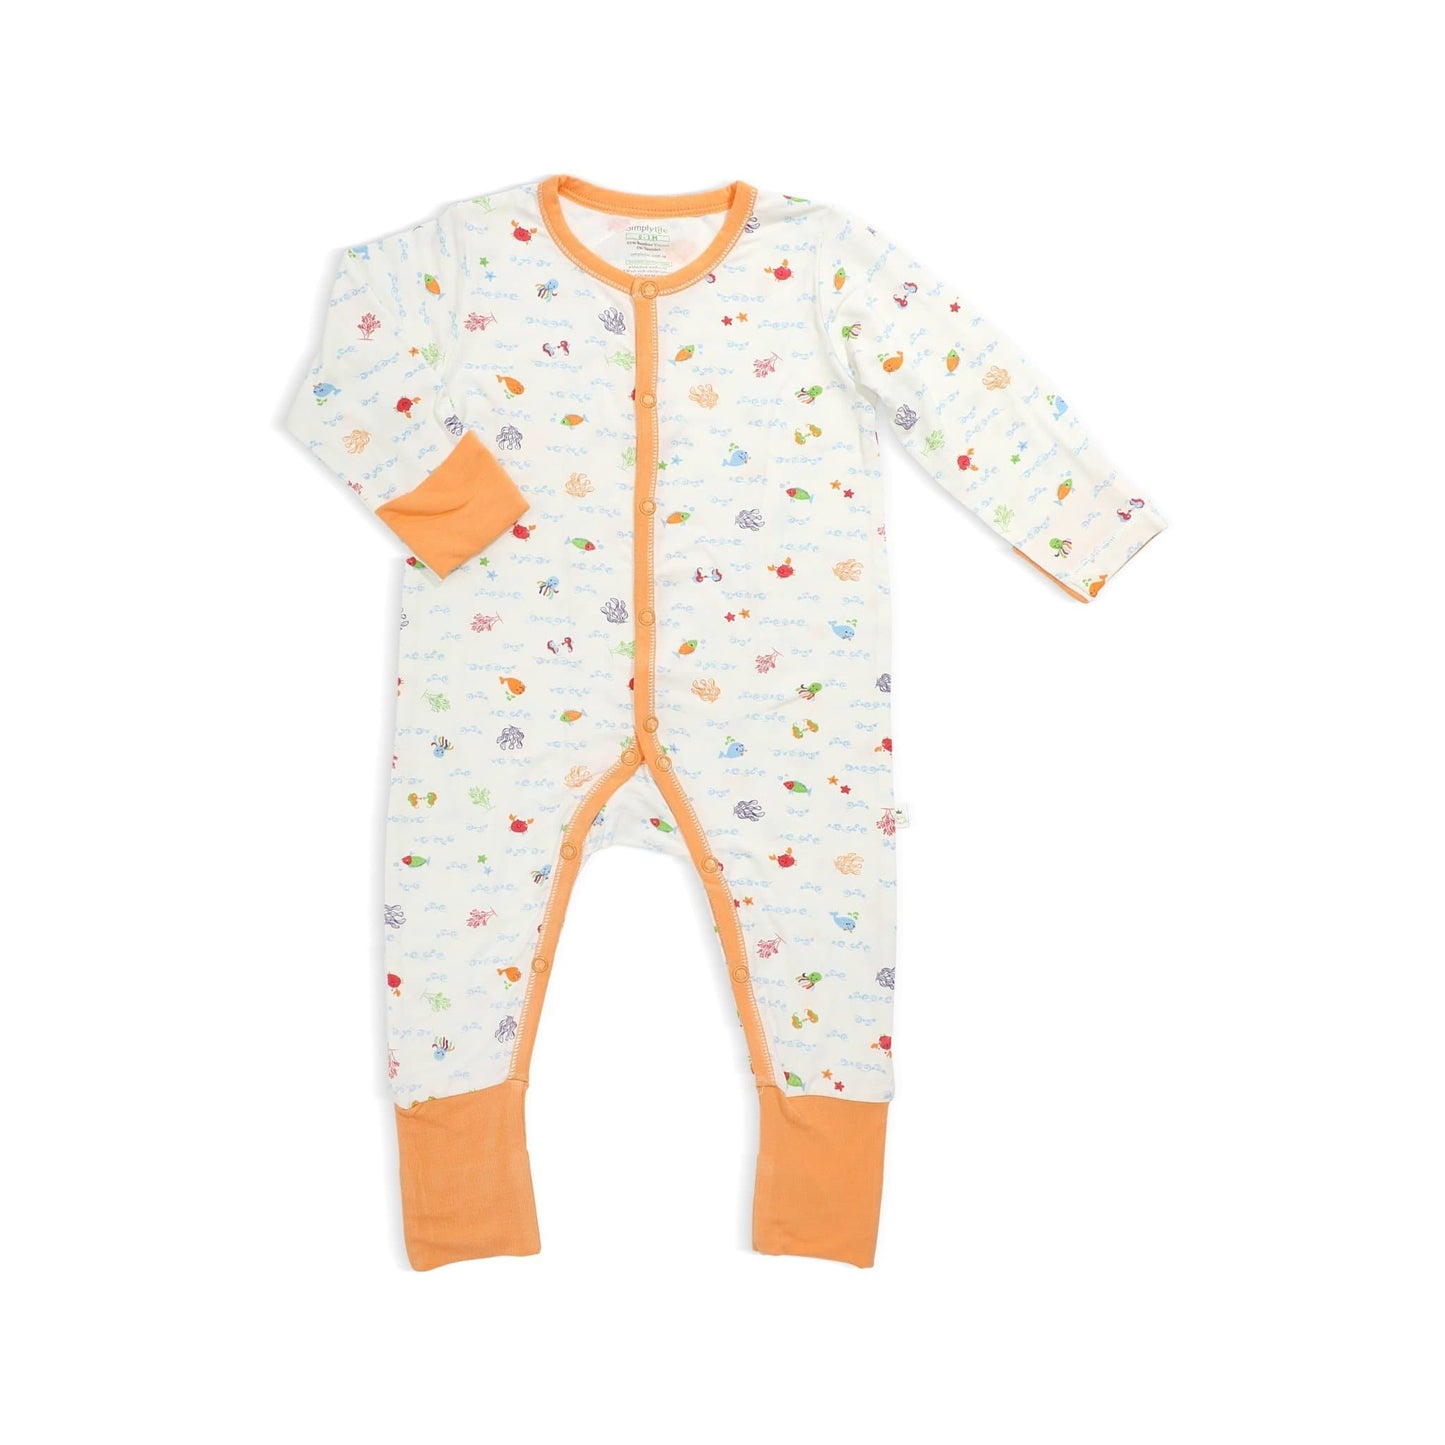 Sea World - Long-sleeved Button Sleepsuit with Folded Mittens & Footie by simplylifebaby